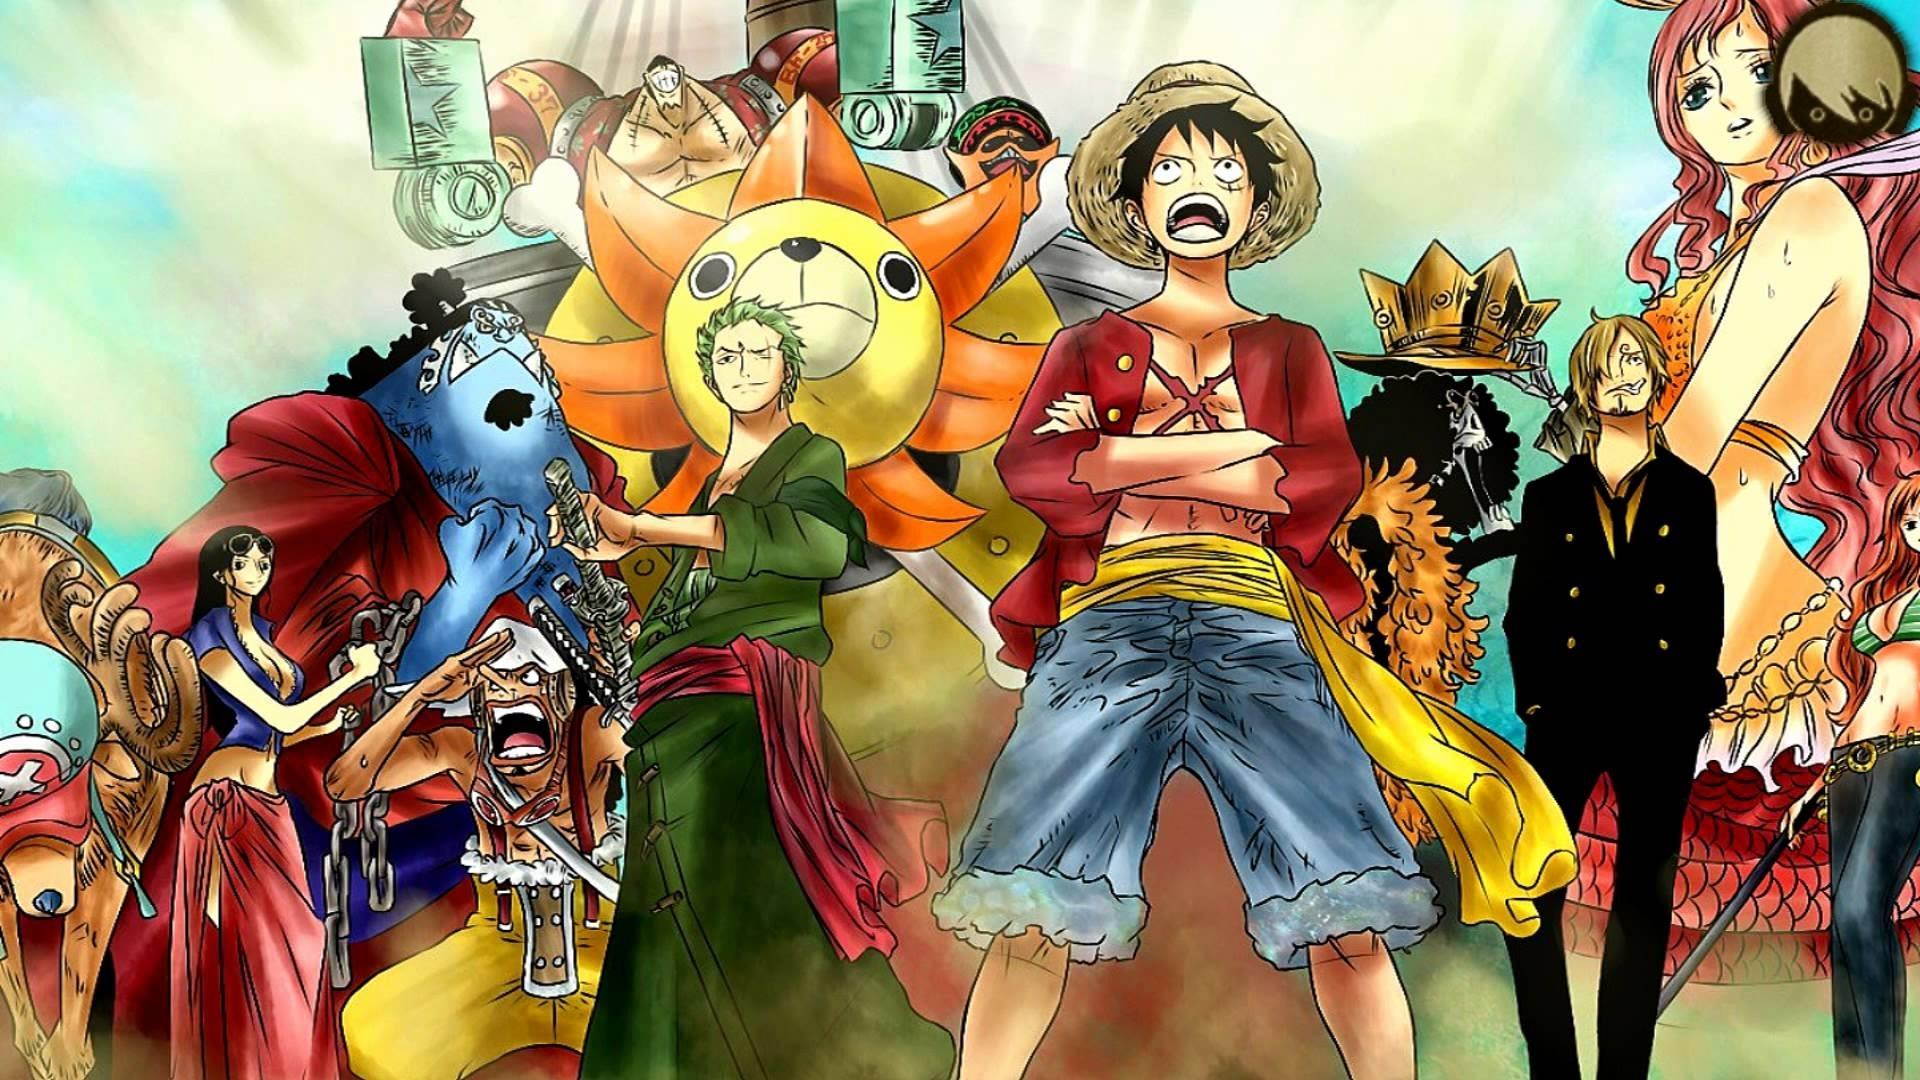 1920 x 1080 · jpeg - 10 Best Epic One Piece Wallpaper FULL HD 19201080 For PC Background 2020